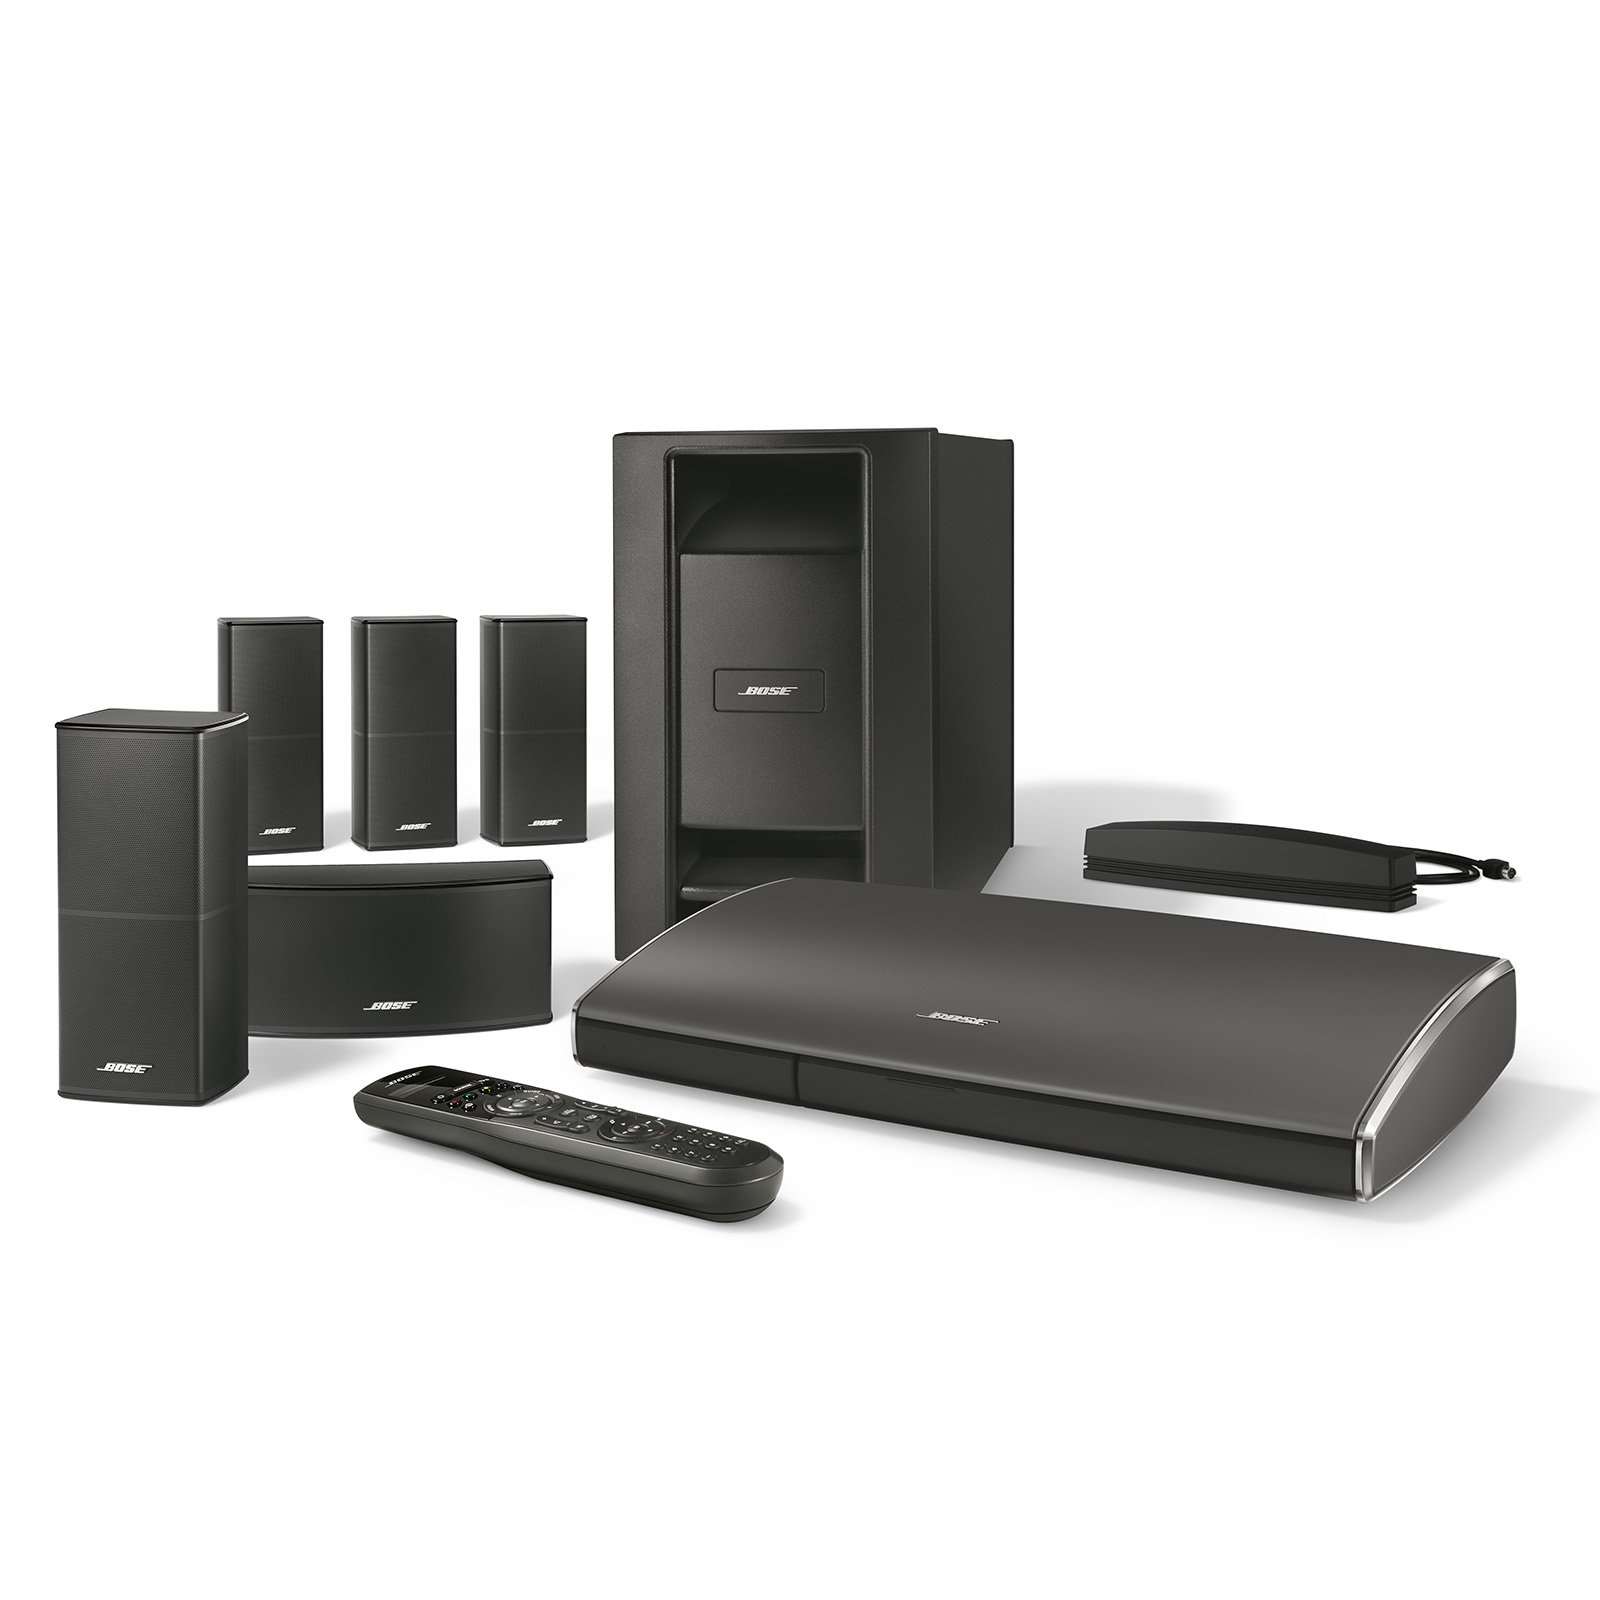 Lifestyle® 535 Series III home entertainment system